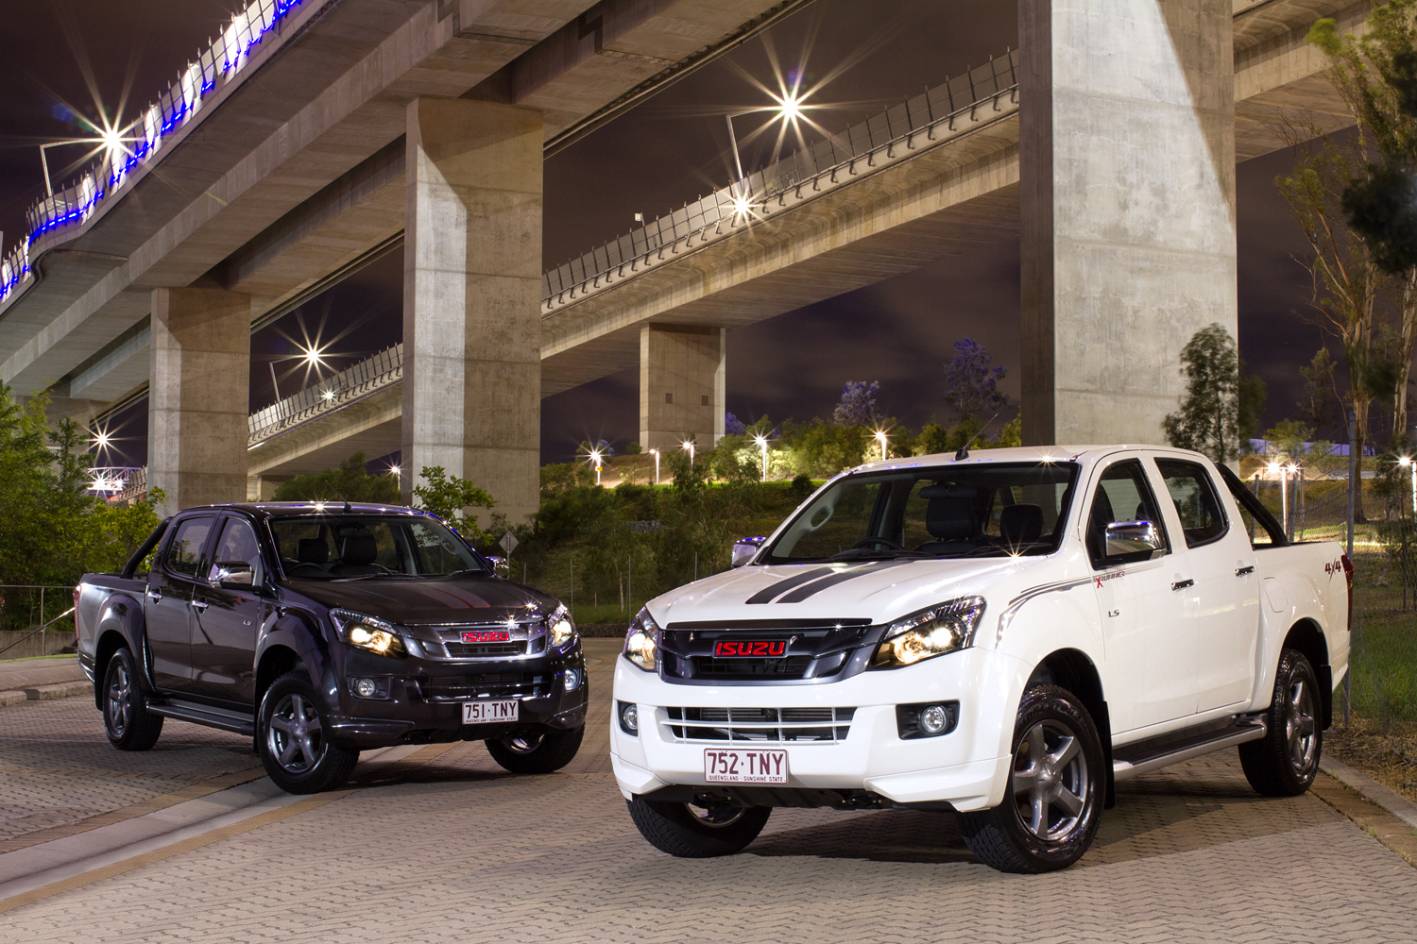 Isuzu D-Max X-Runner limited edition on sale from $46,490